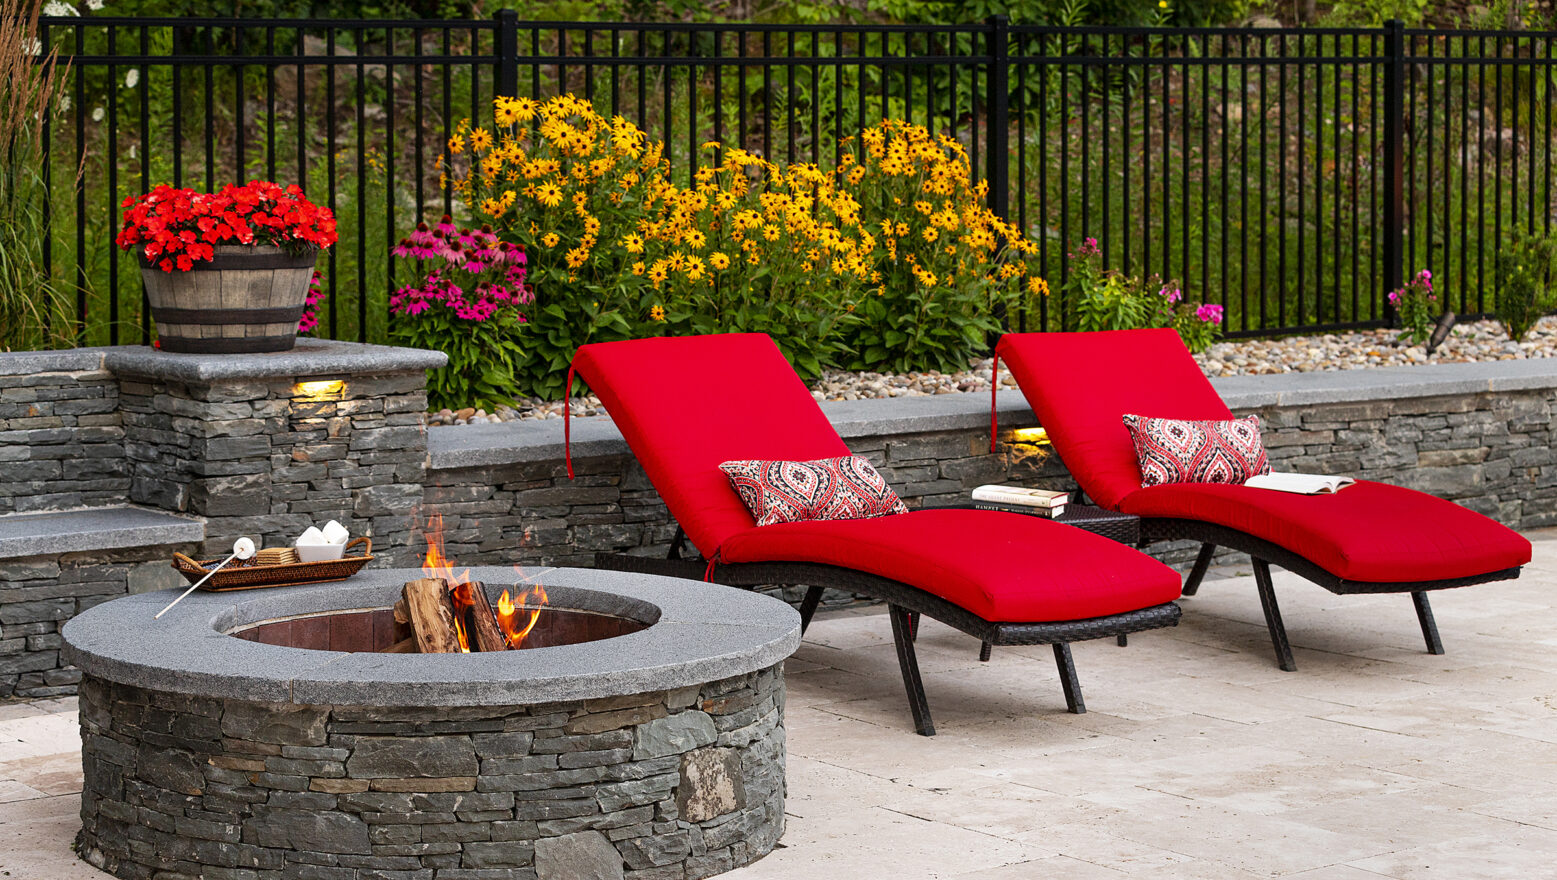 Pool chairs by the stone fire pit and seating wall with s'mores. Dex by Terra Hardscaping & Landscaping project in Sterling Massachusetts.